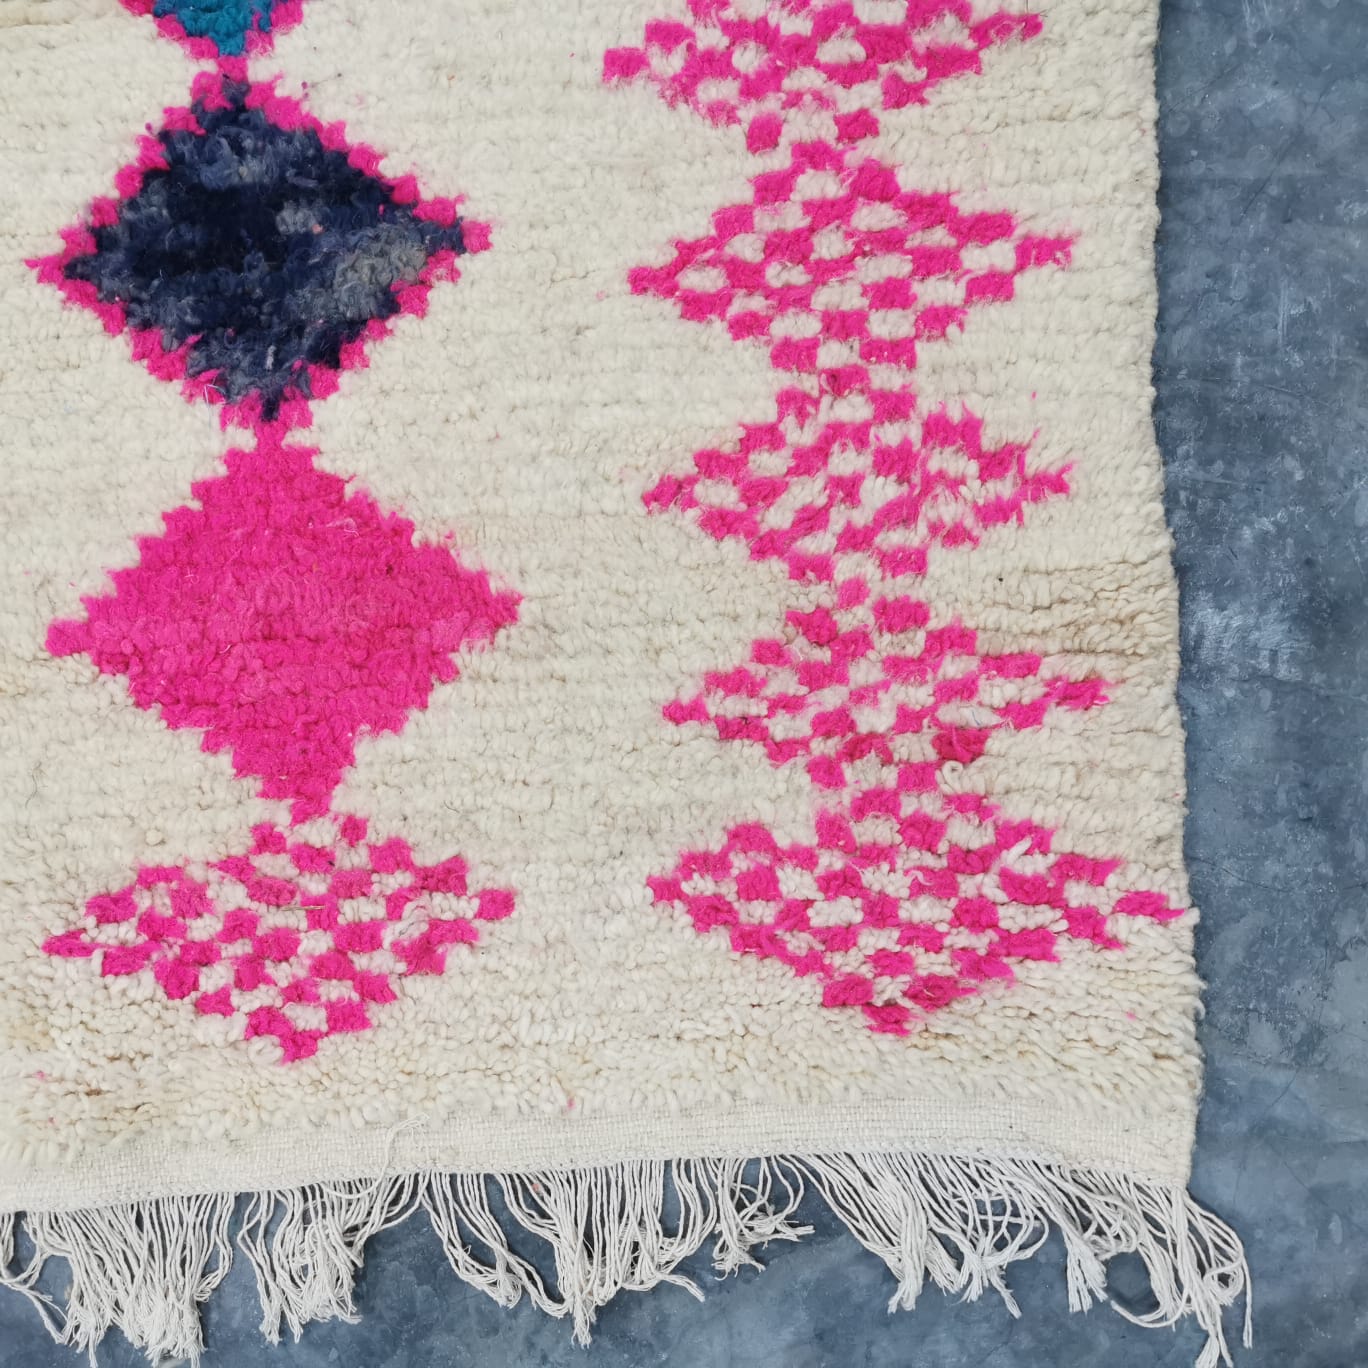 Find Unique Moroccan Rugs and Handcrafted Décor - Beni and Area Styles